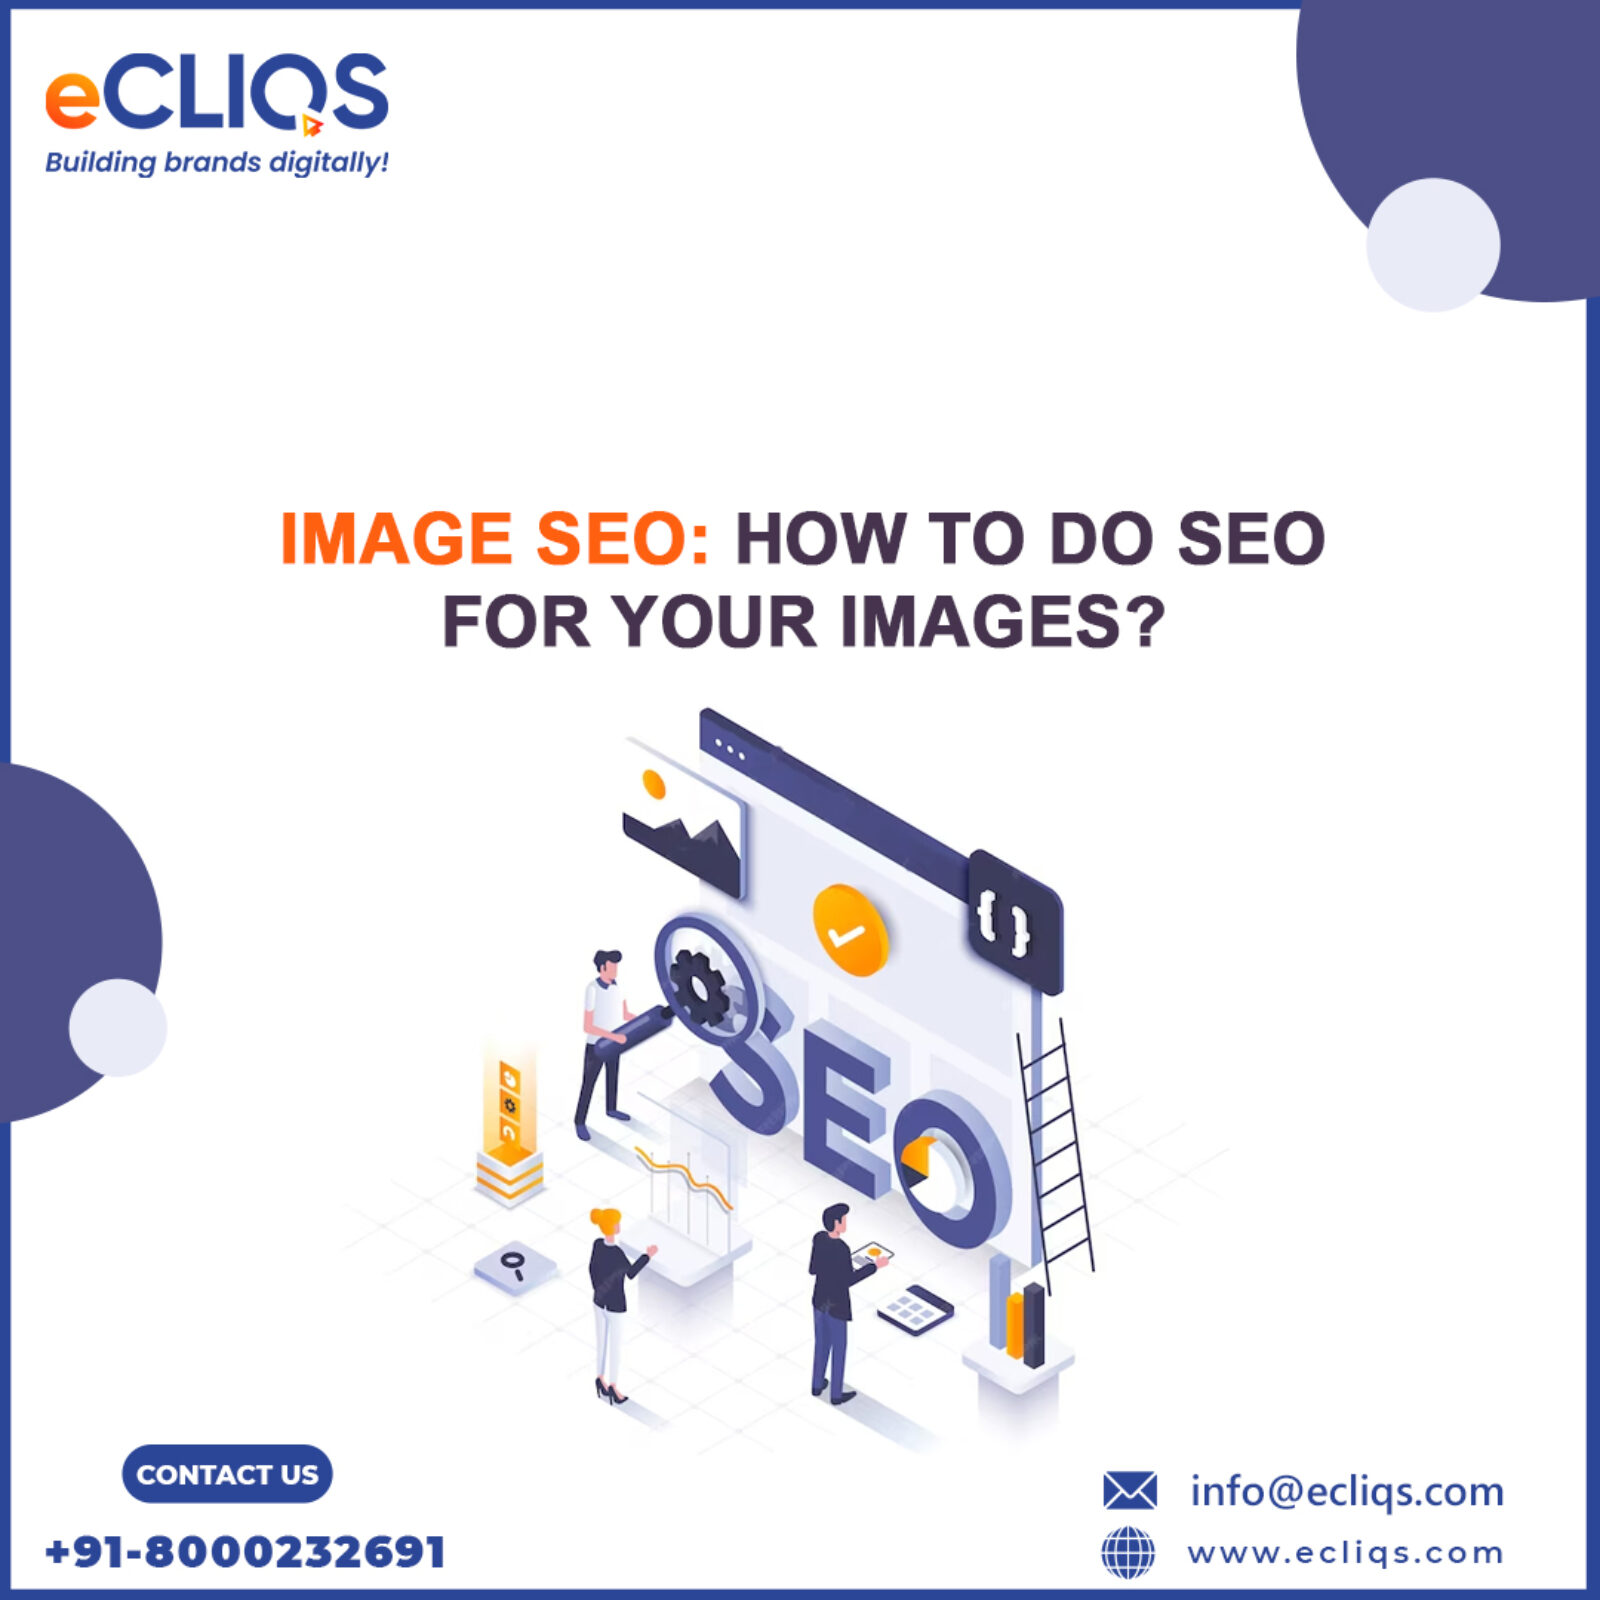 Image SEO: How to Do SEO for Your Images